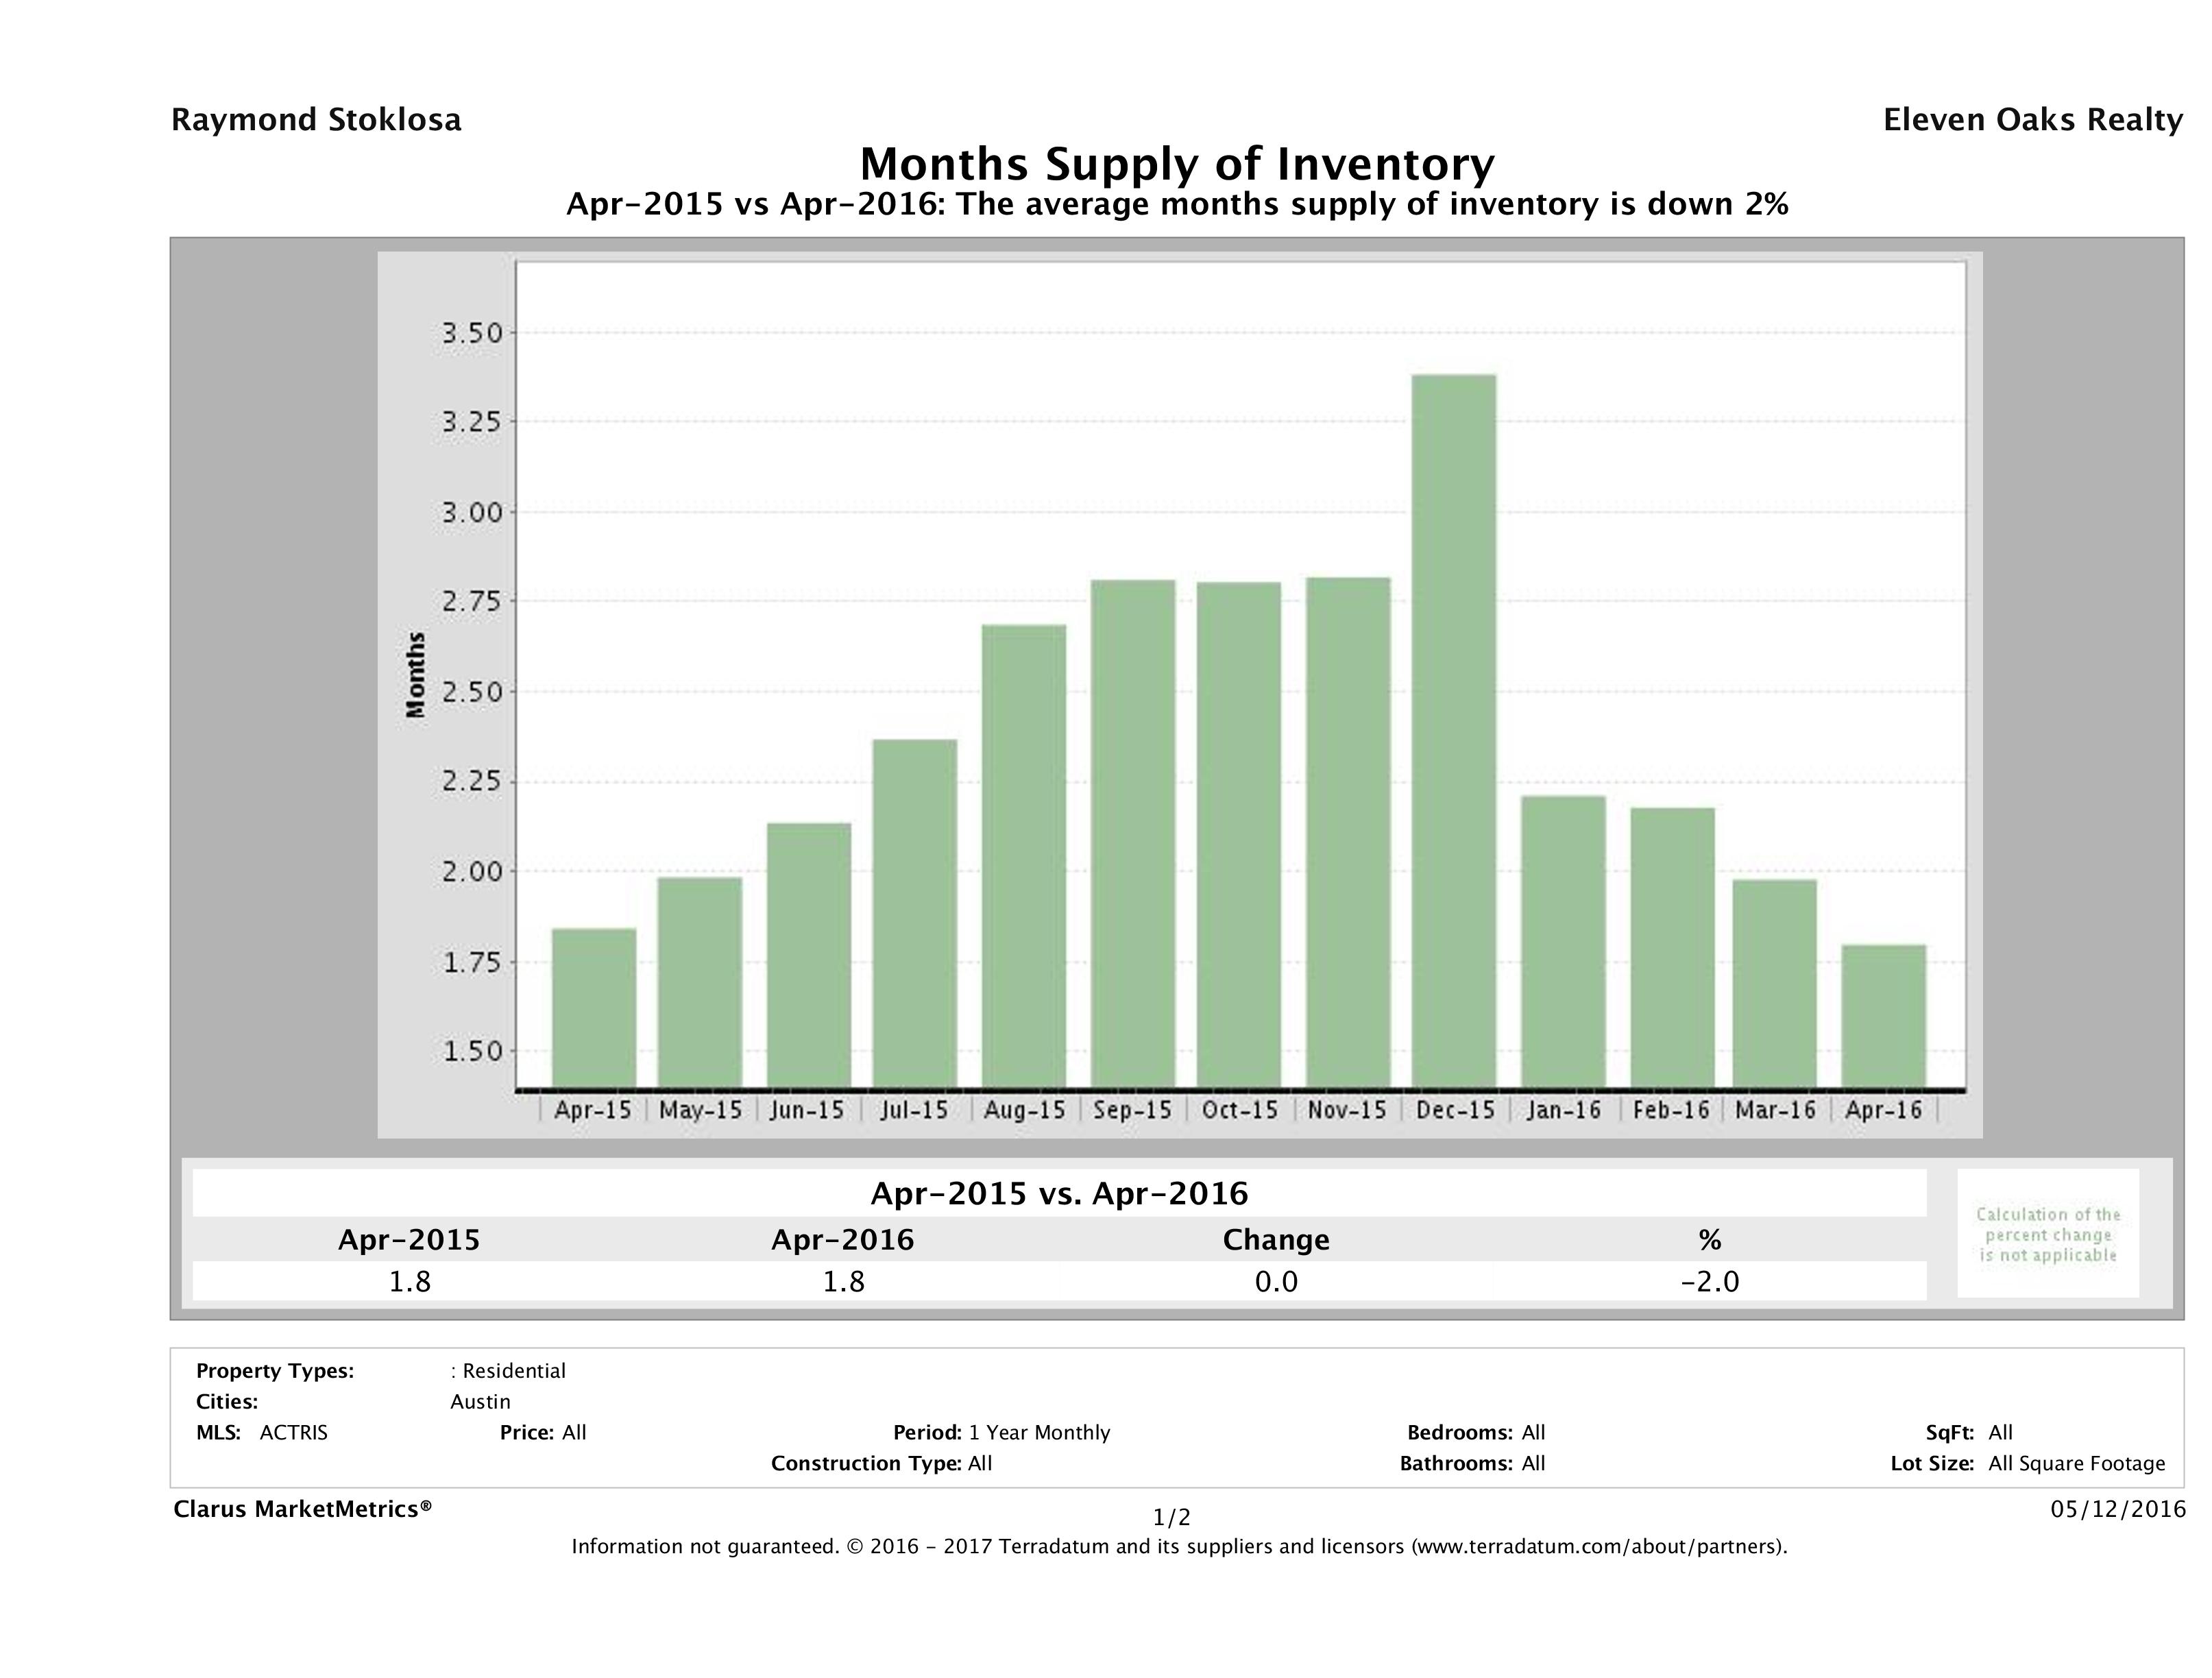 Austin single family home months inventory April 2016